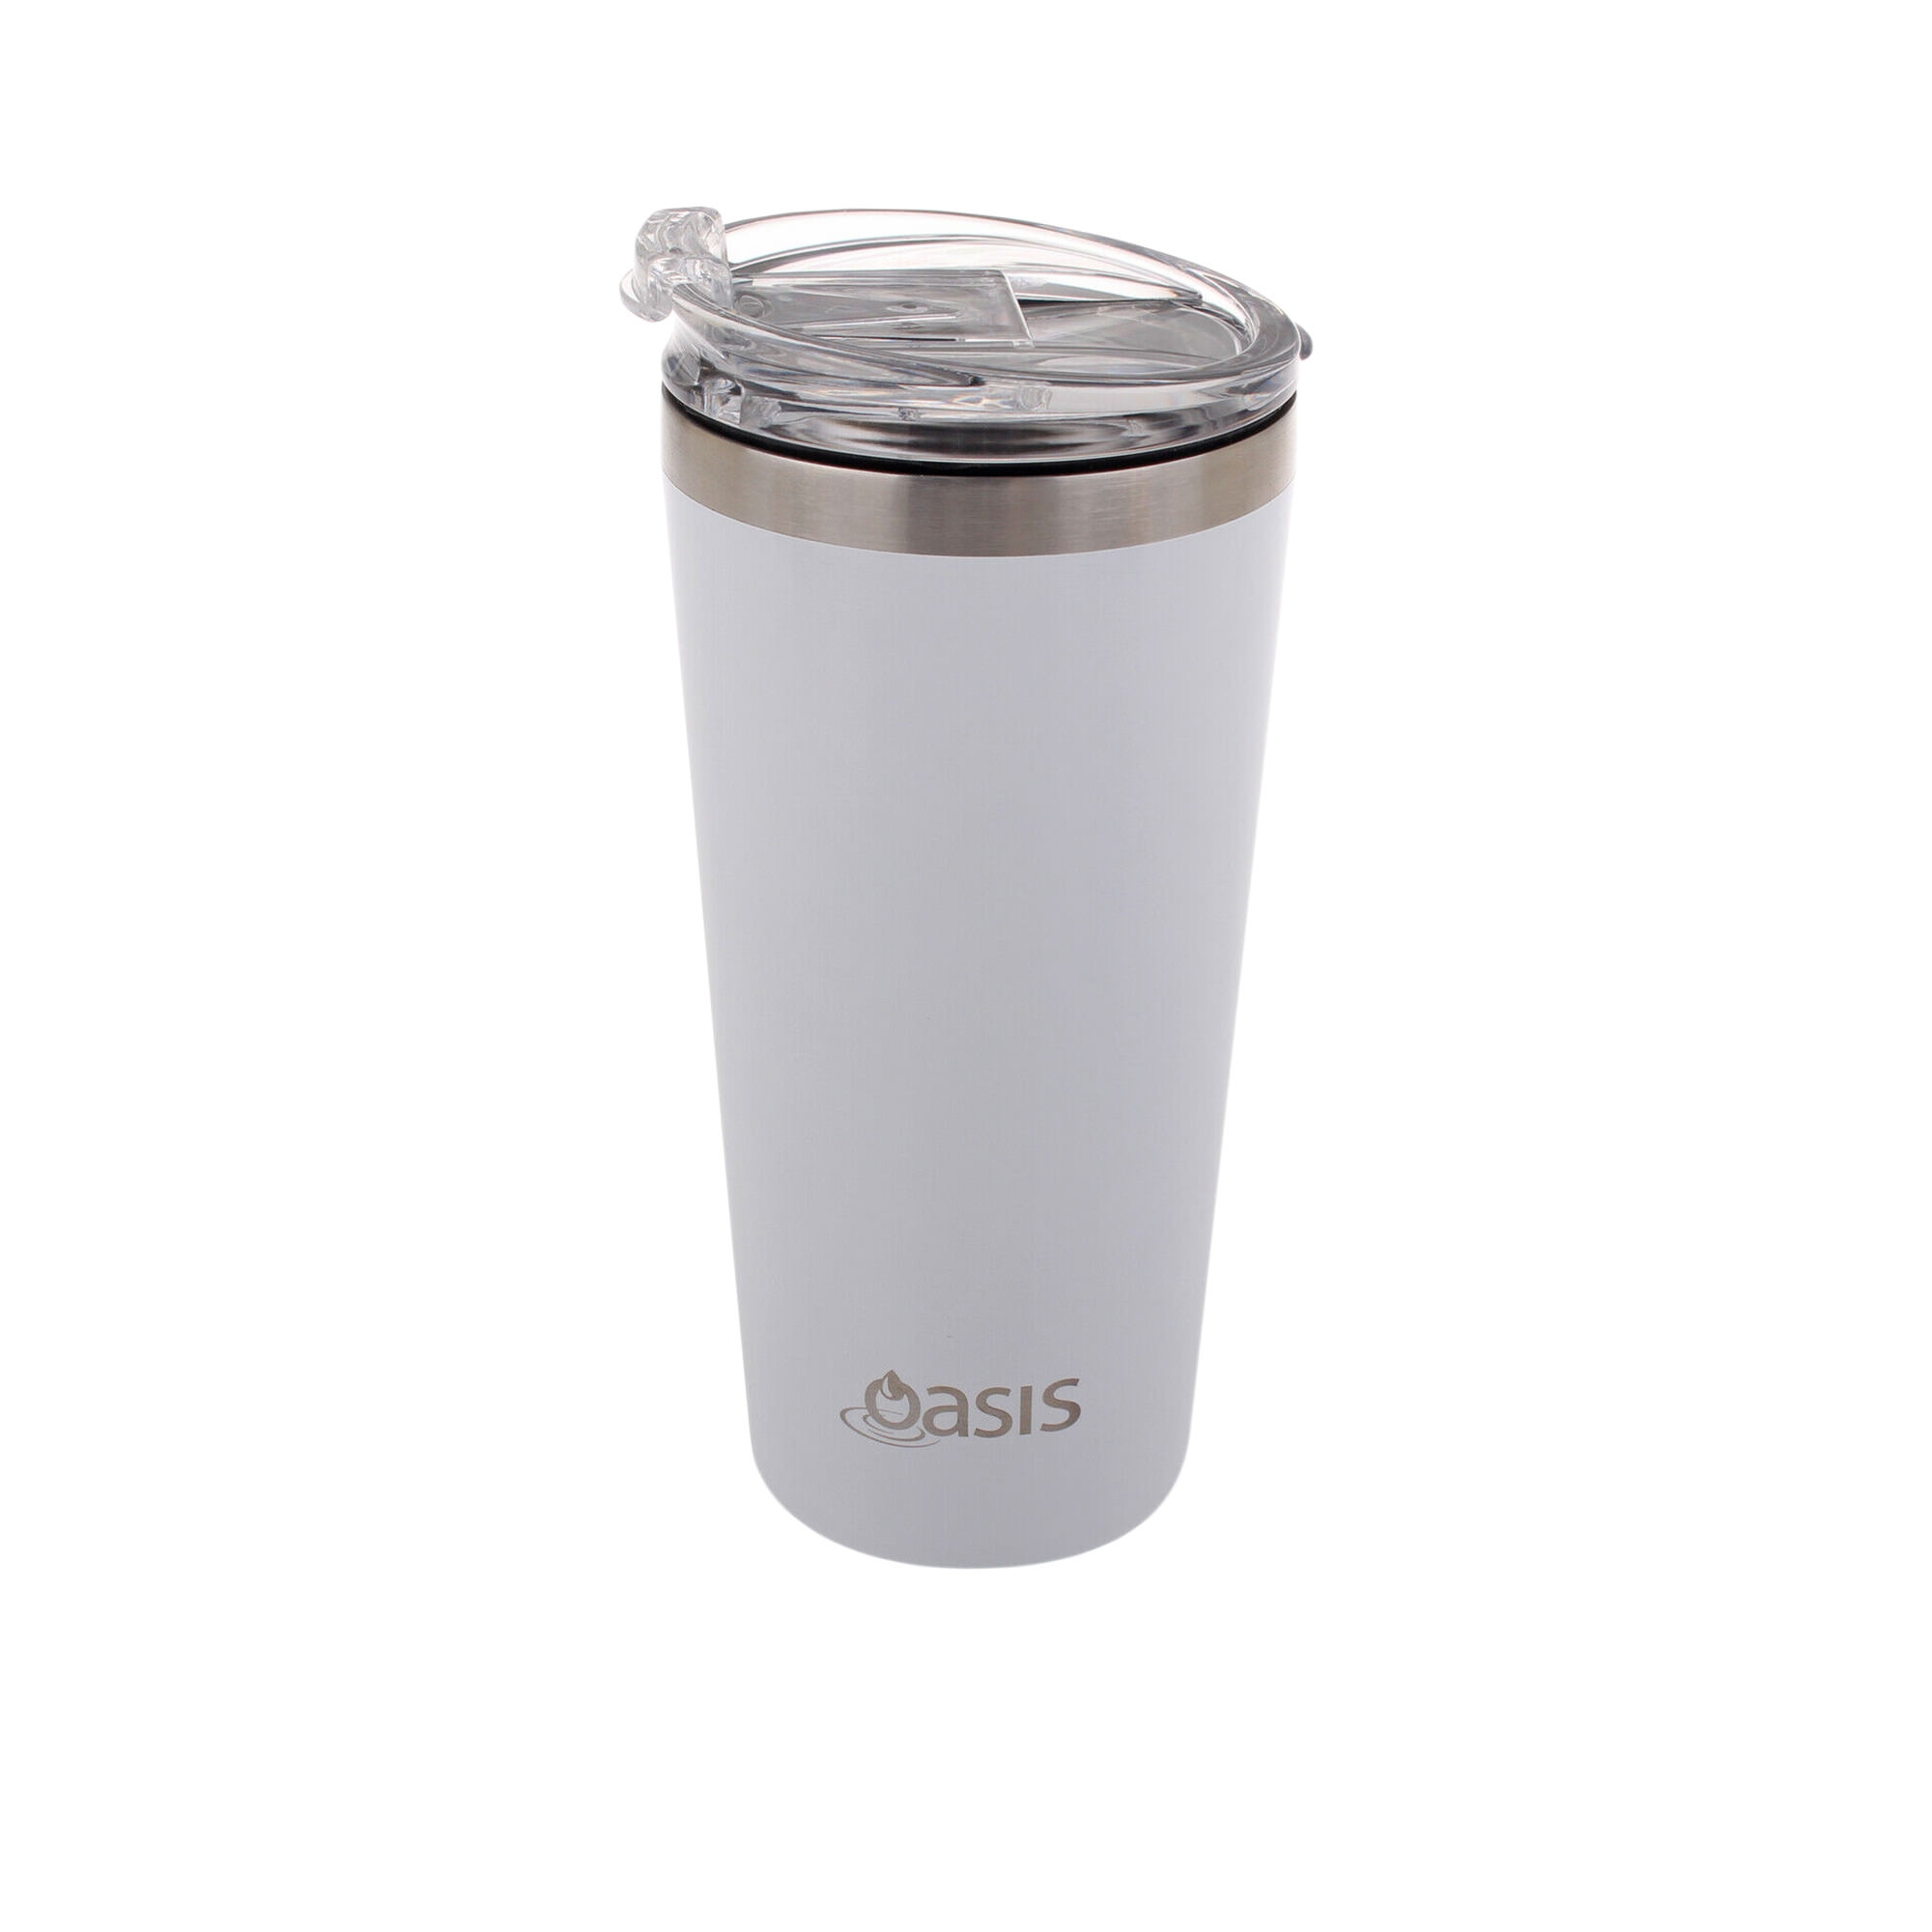 Oasis Double Wall Insulated Travel Mug with Lid 480ml White Image 1